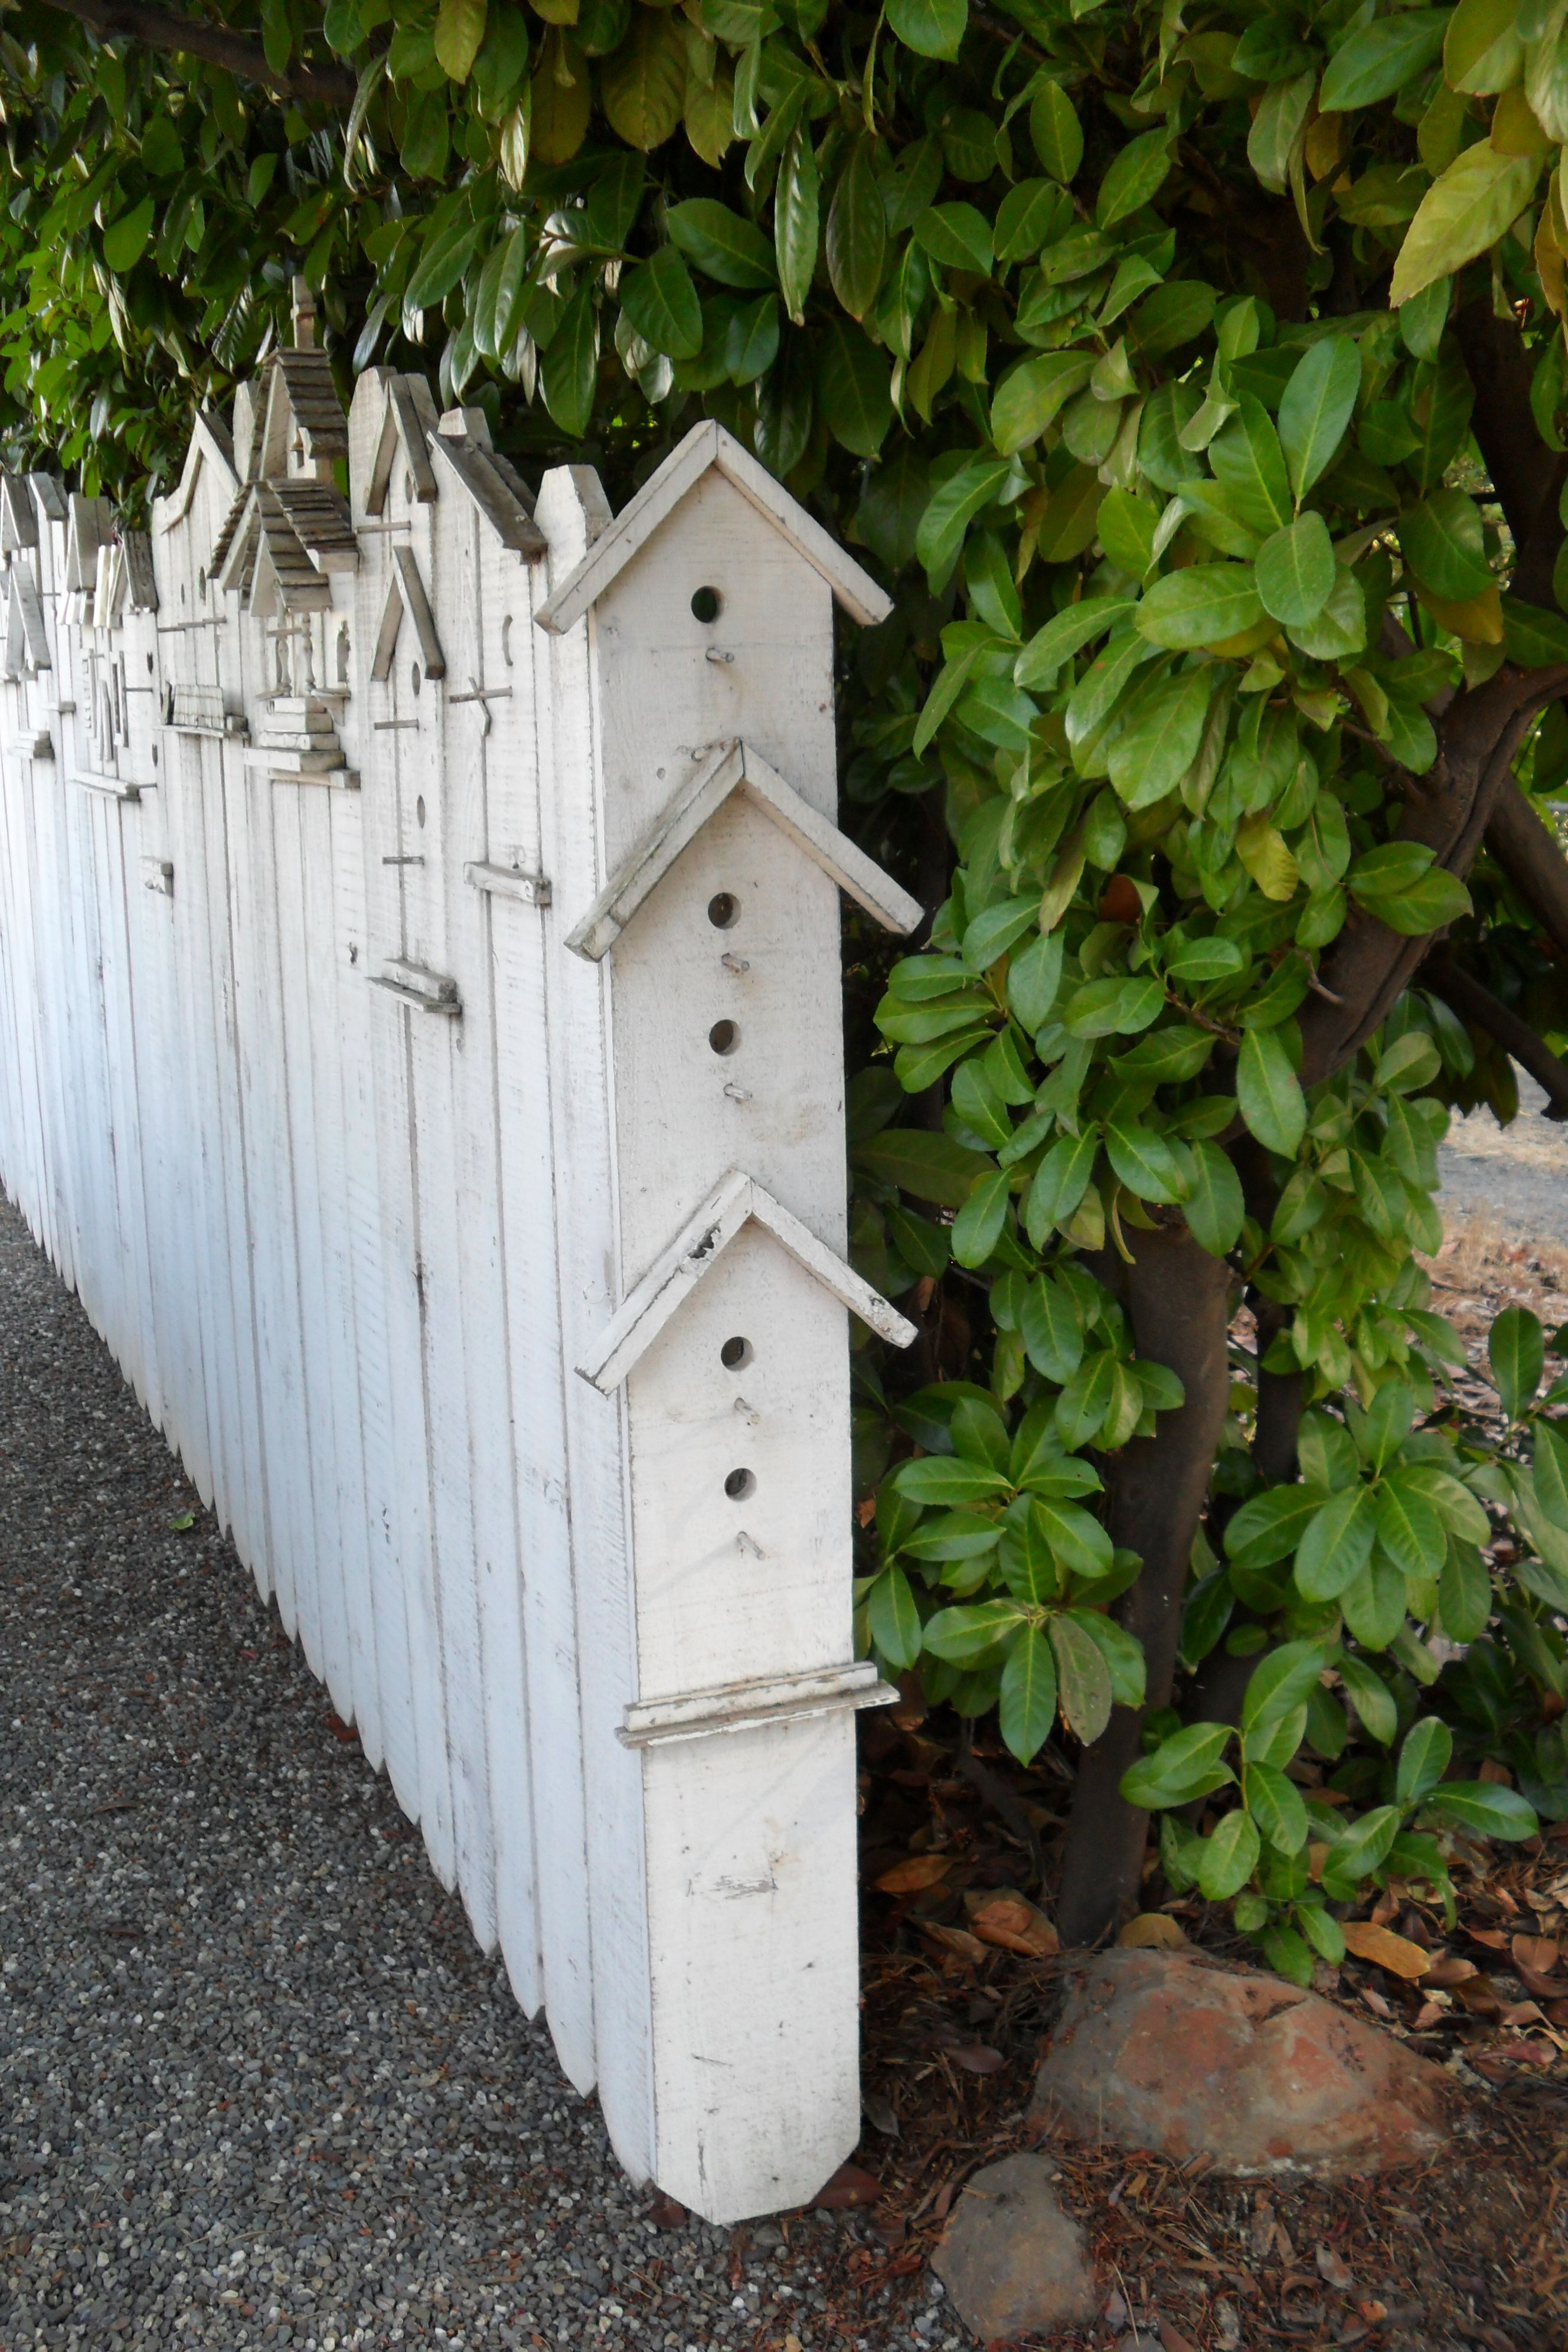 Add a simple side piece of wood to an ordinary wooden fence to create a birdhouse fence, by drilling h